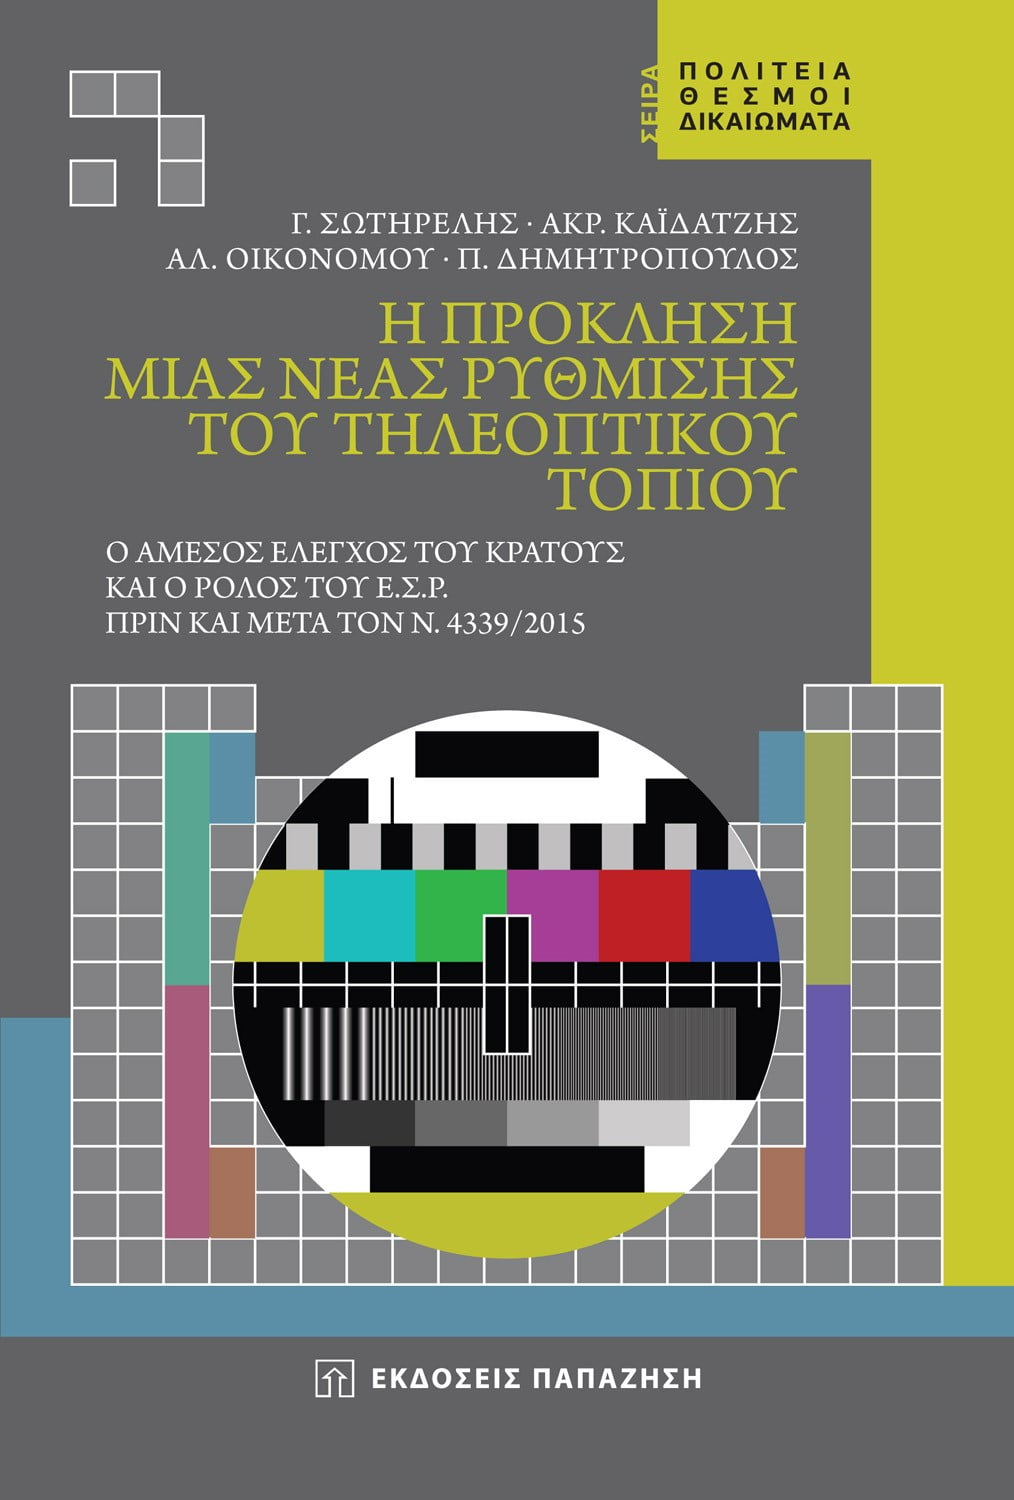 Read more about the article Η πρόκληση μιας νέας ρύθμισης του ραδιοτηλεοπτικού τοπίου